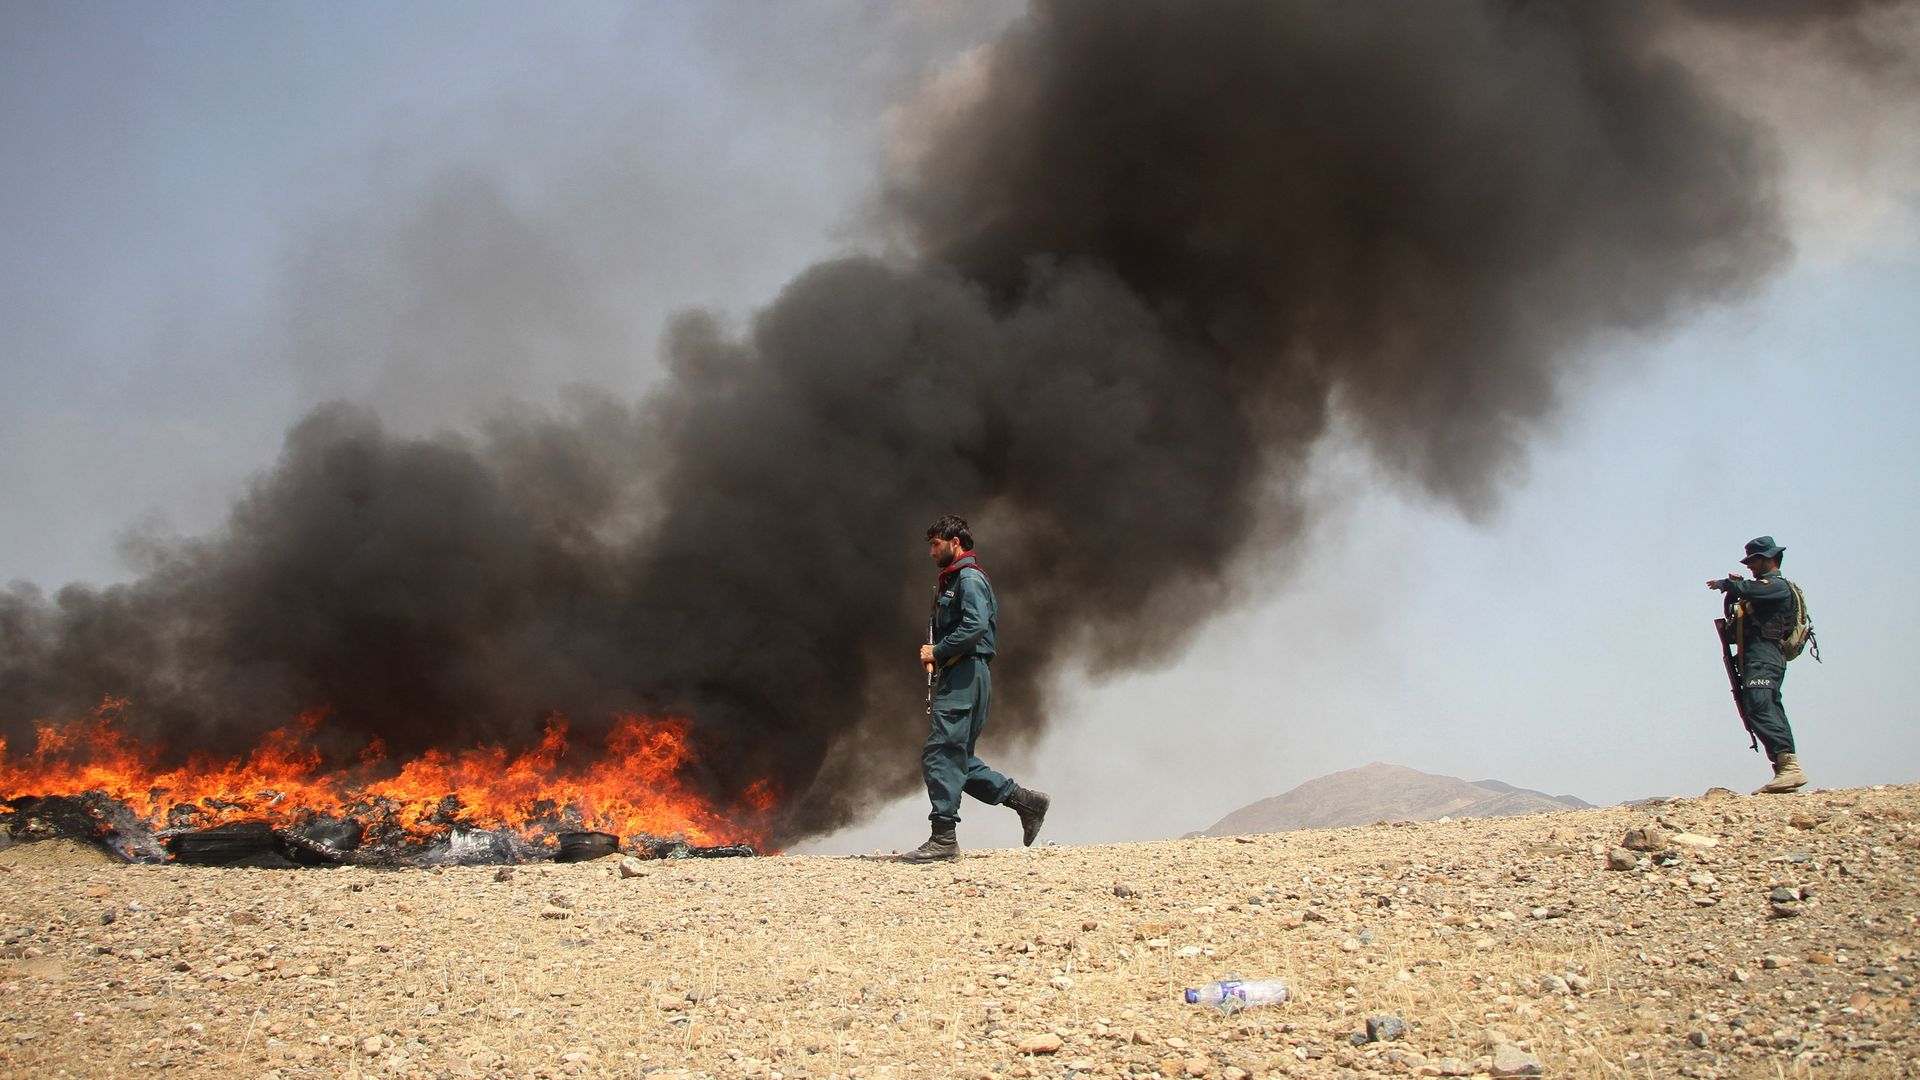 Photo of a person walking past a large fire in a desert